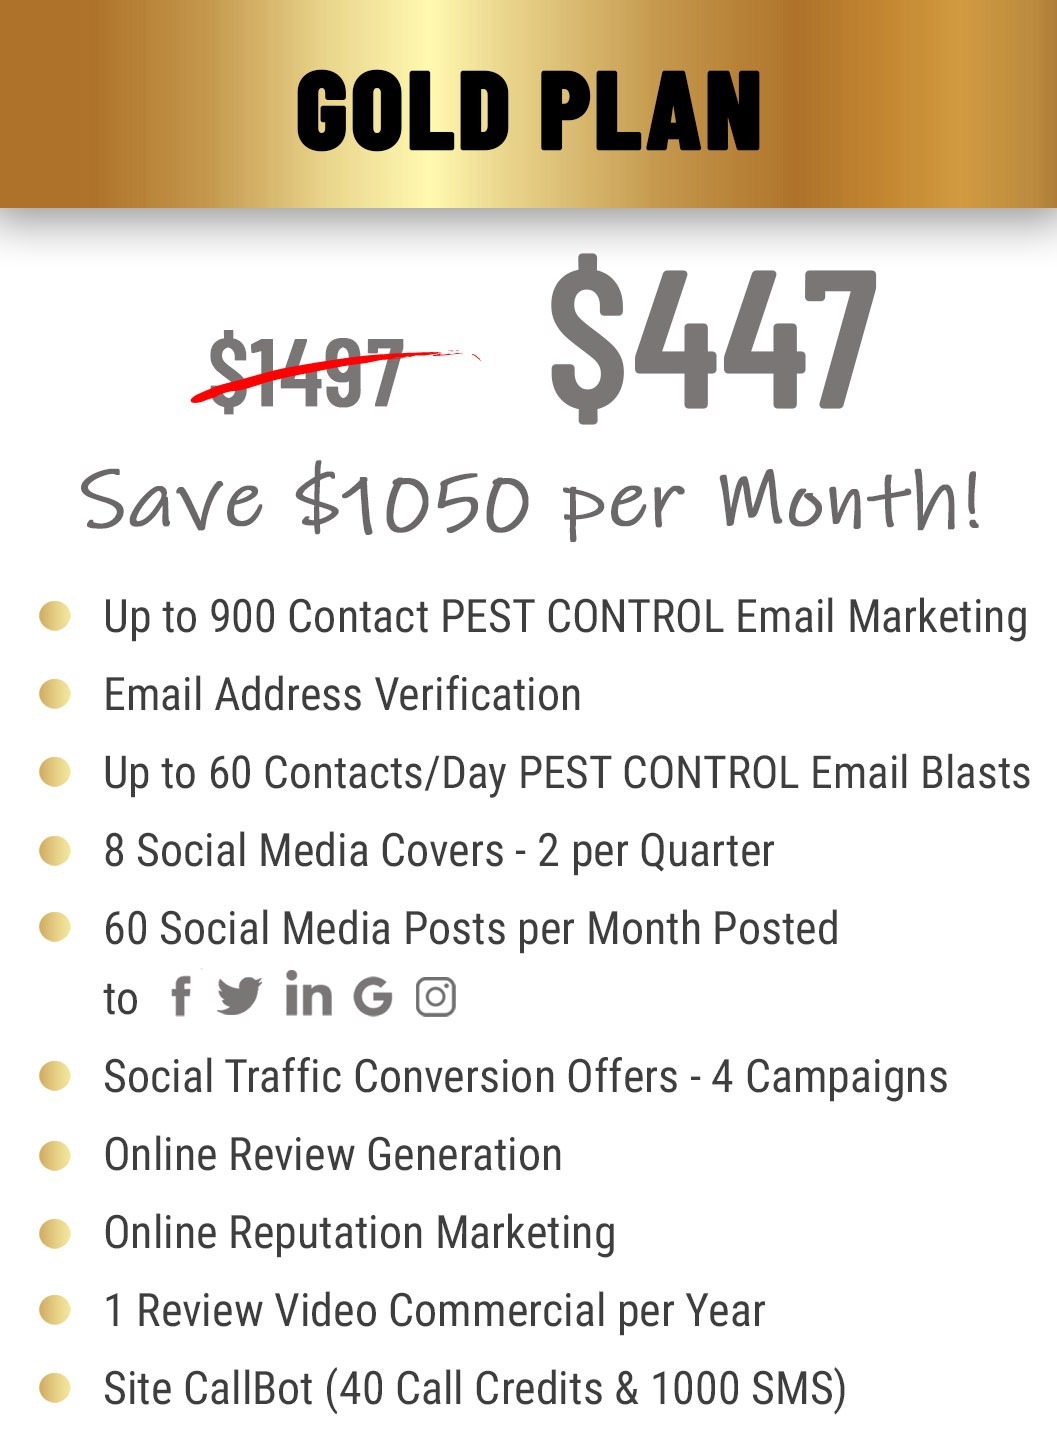 gold plan $447 per month pricing and features for pest control companies.